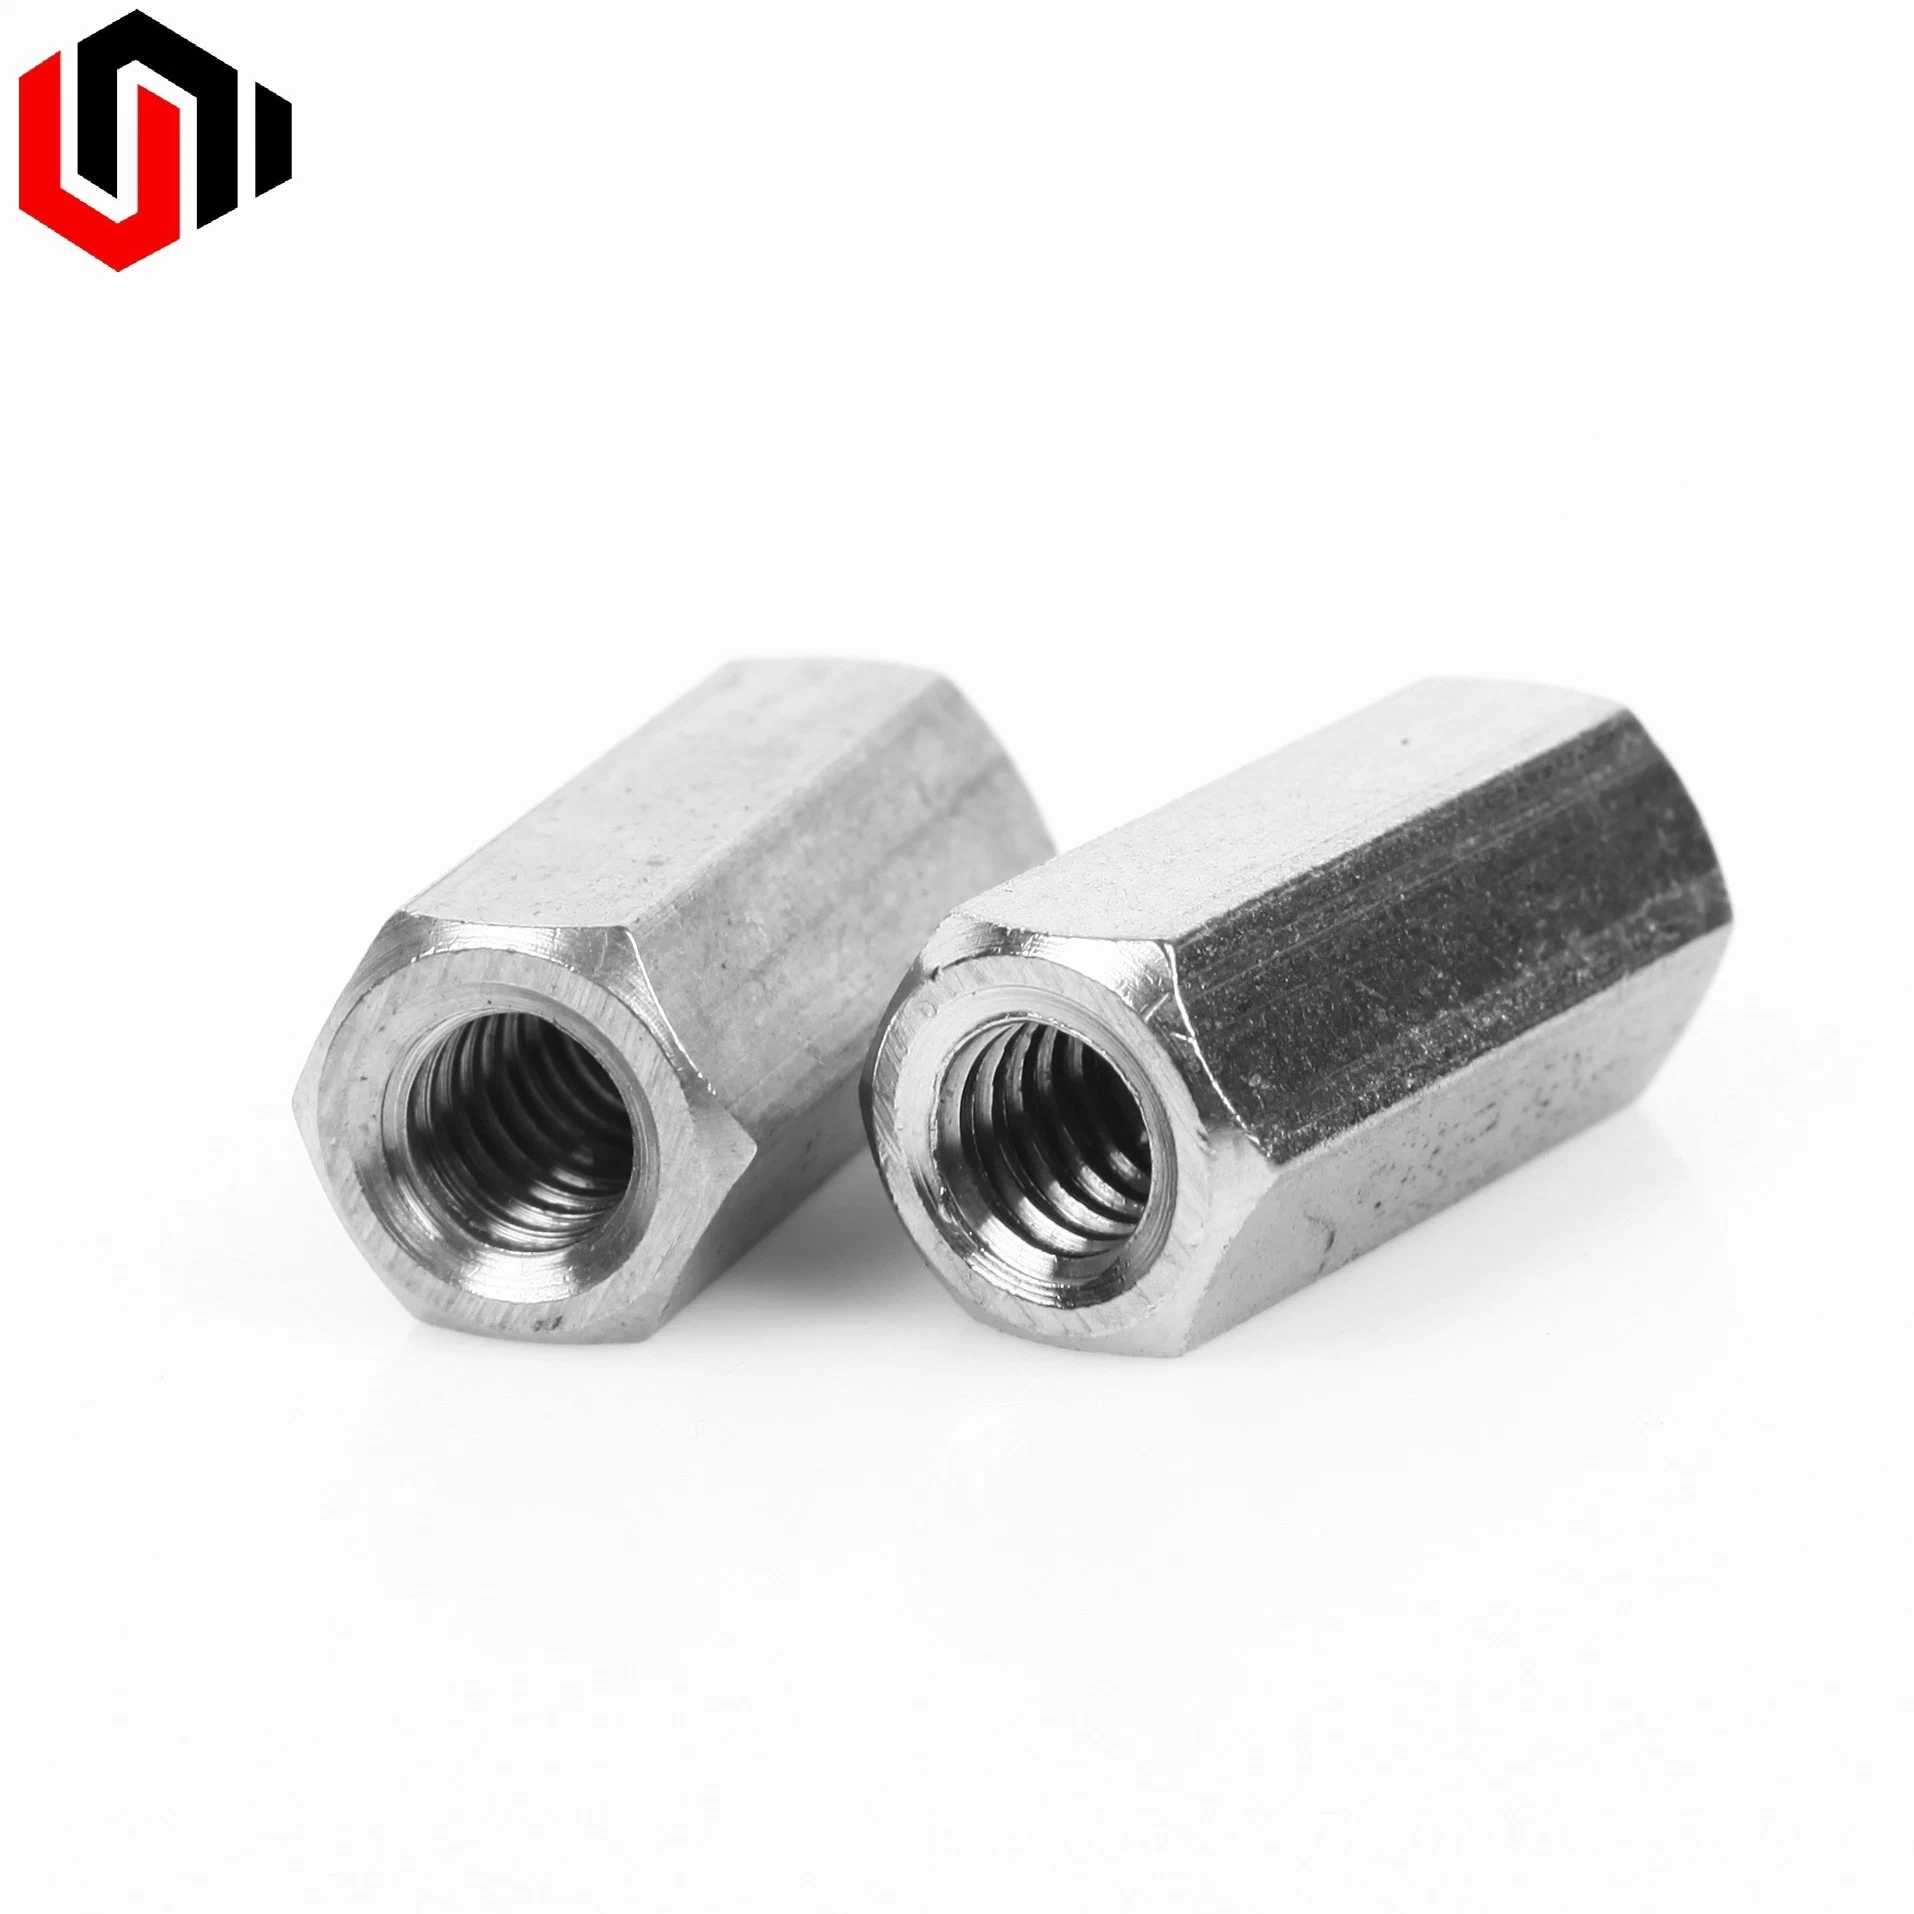 Stainless Steel 304/316 Hexagon Coupling Nut DIN6334